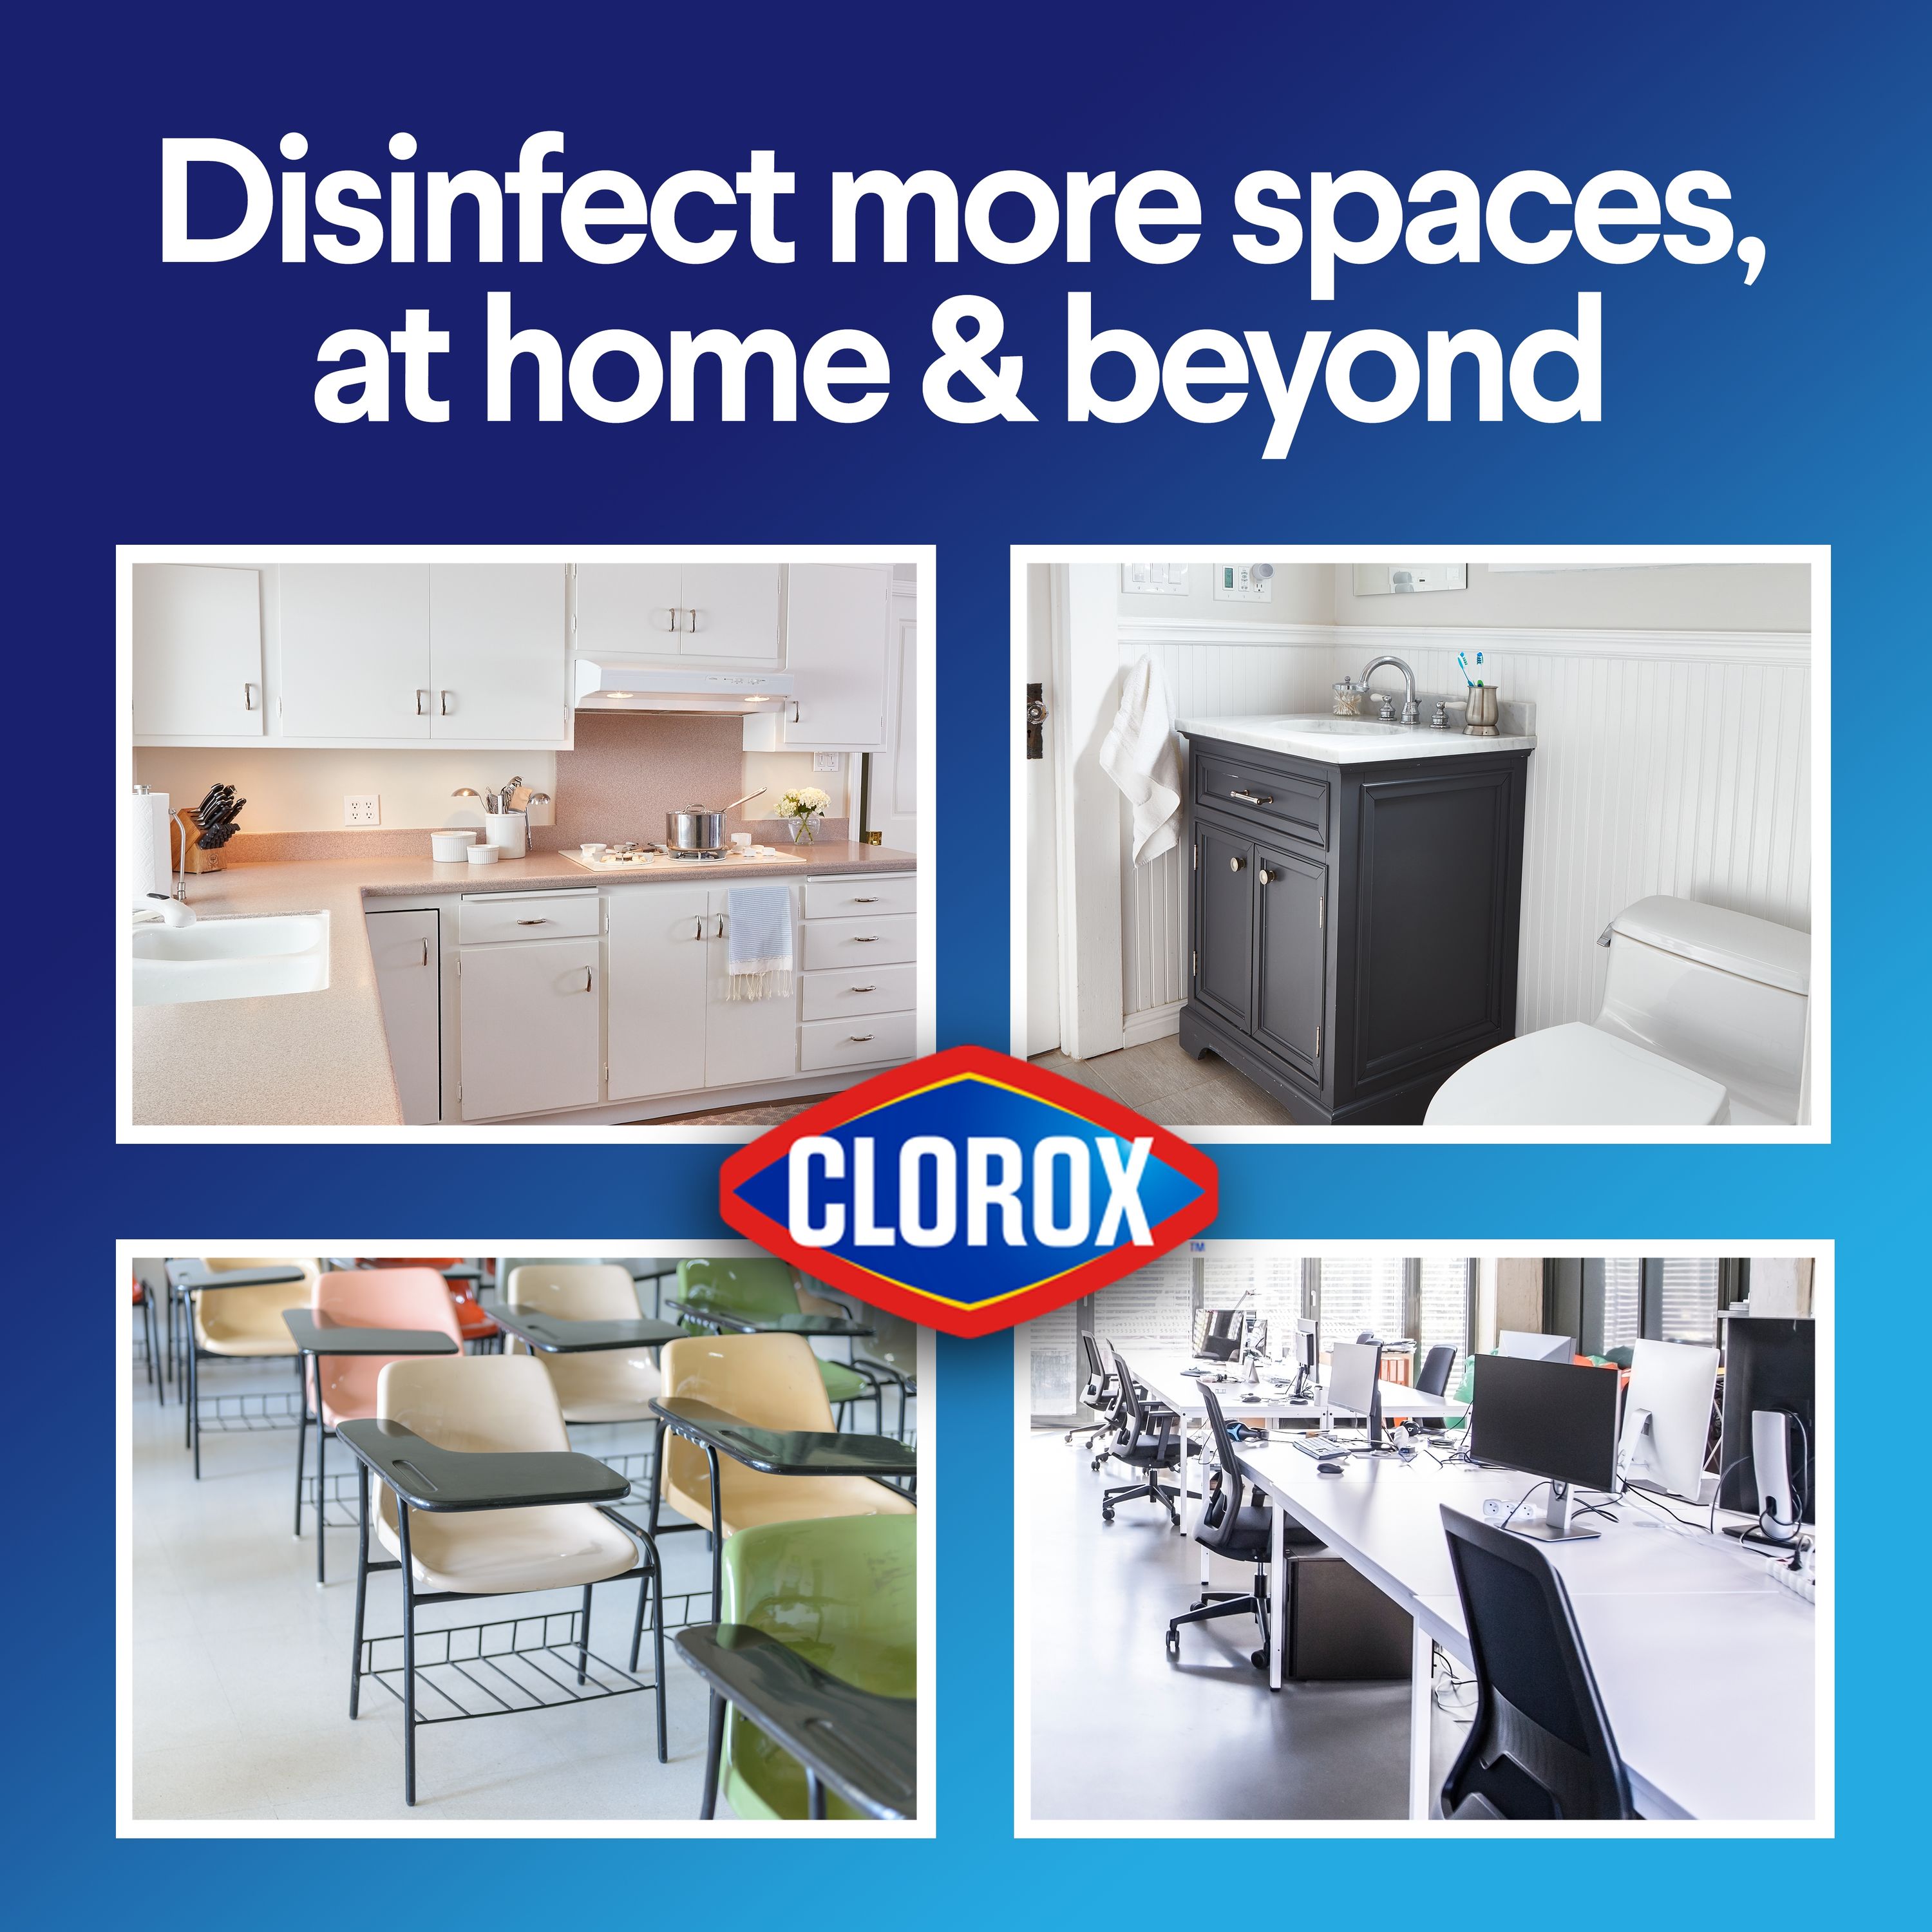 Shop Clorox Kitchen Cleaning Supplies with Disinfecting Wipes